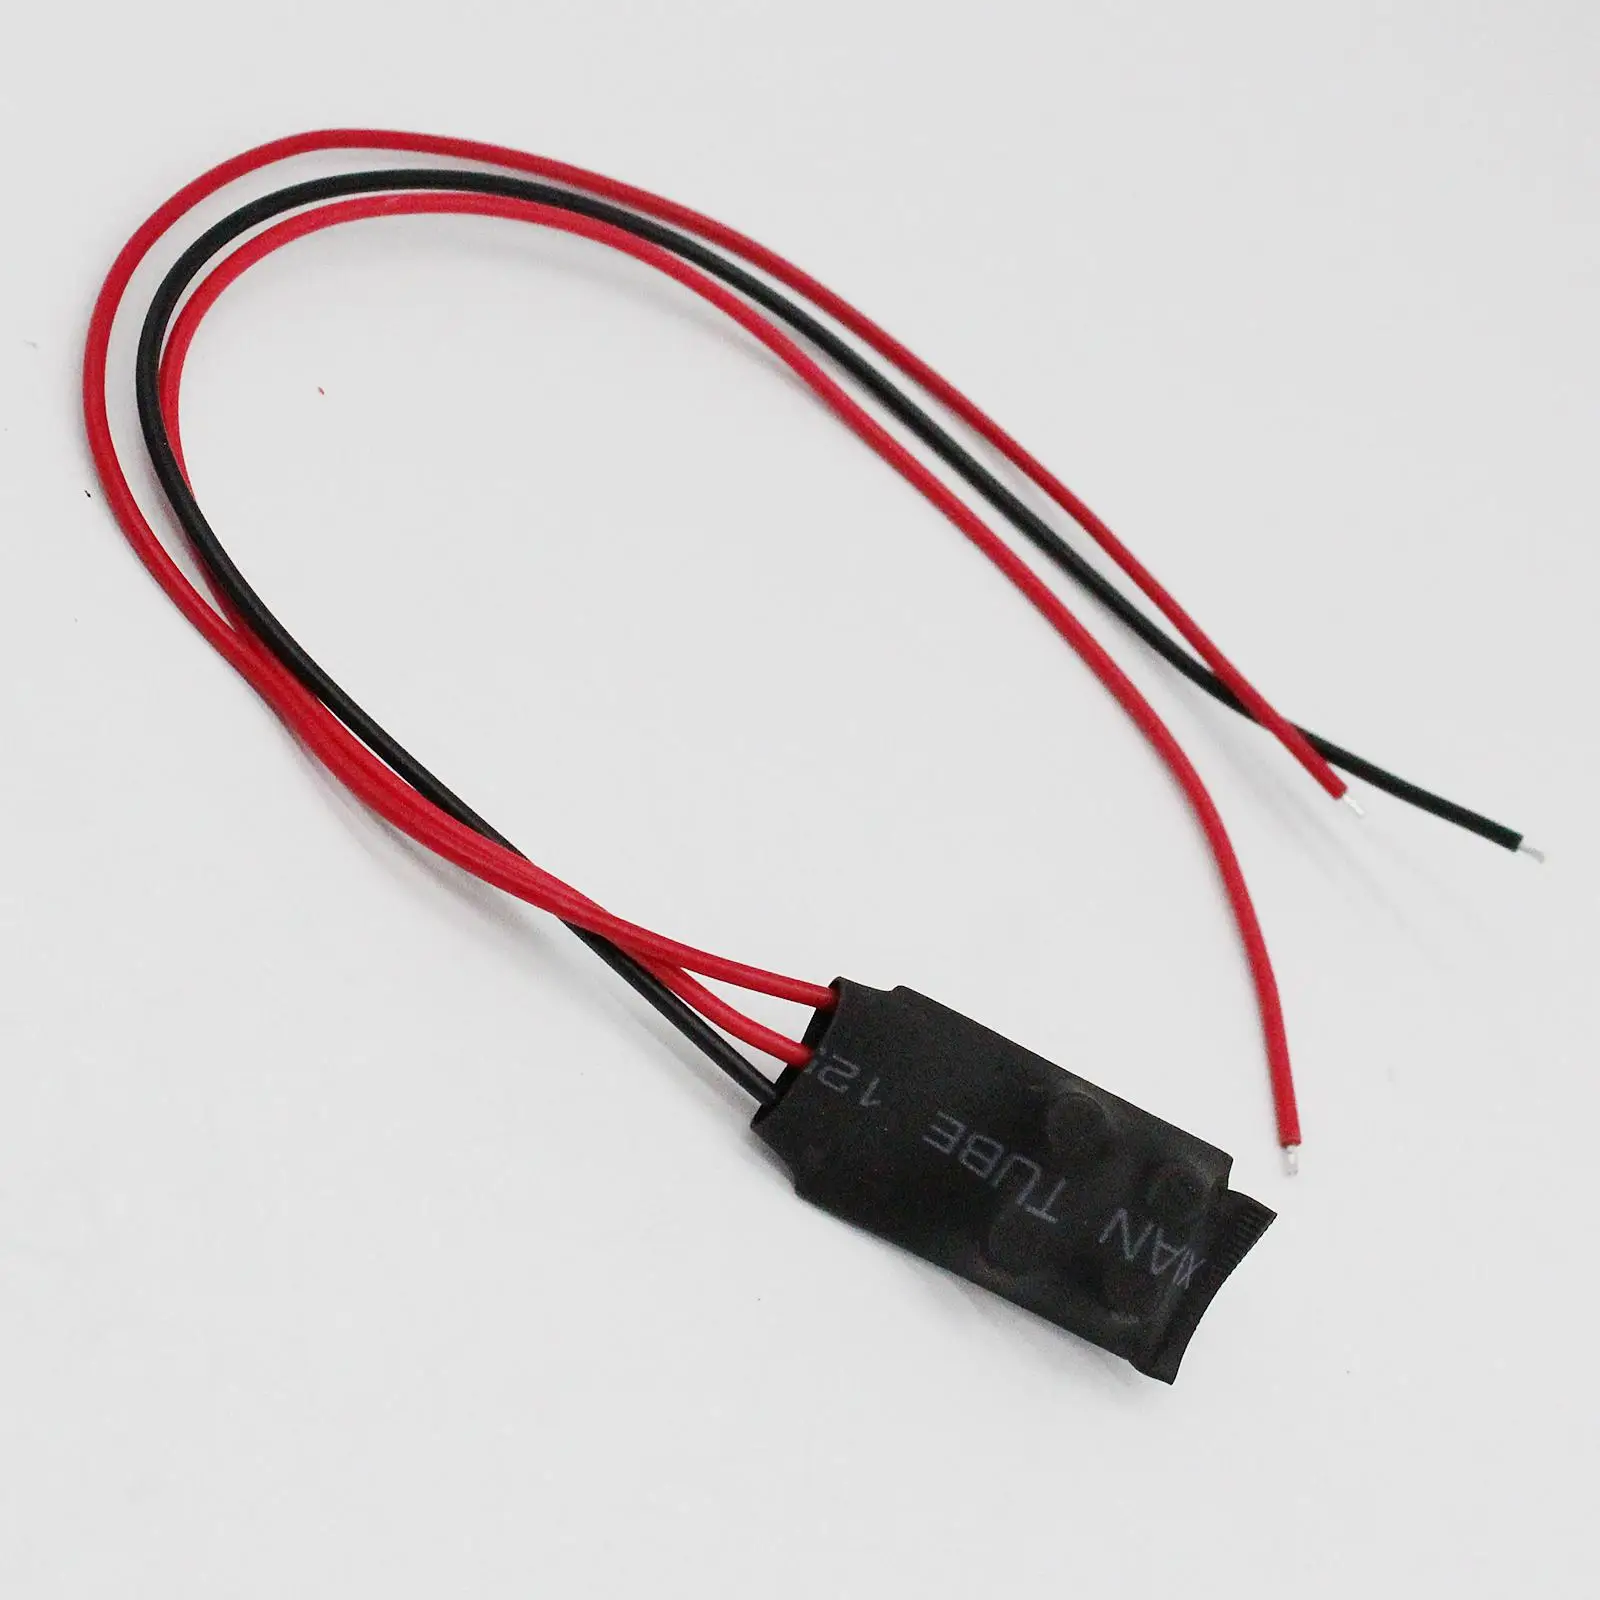 Parking Camera Signal Filter Power Filter for   Accessories